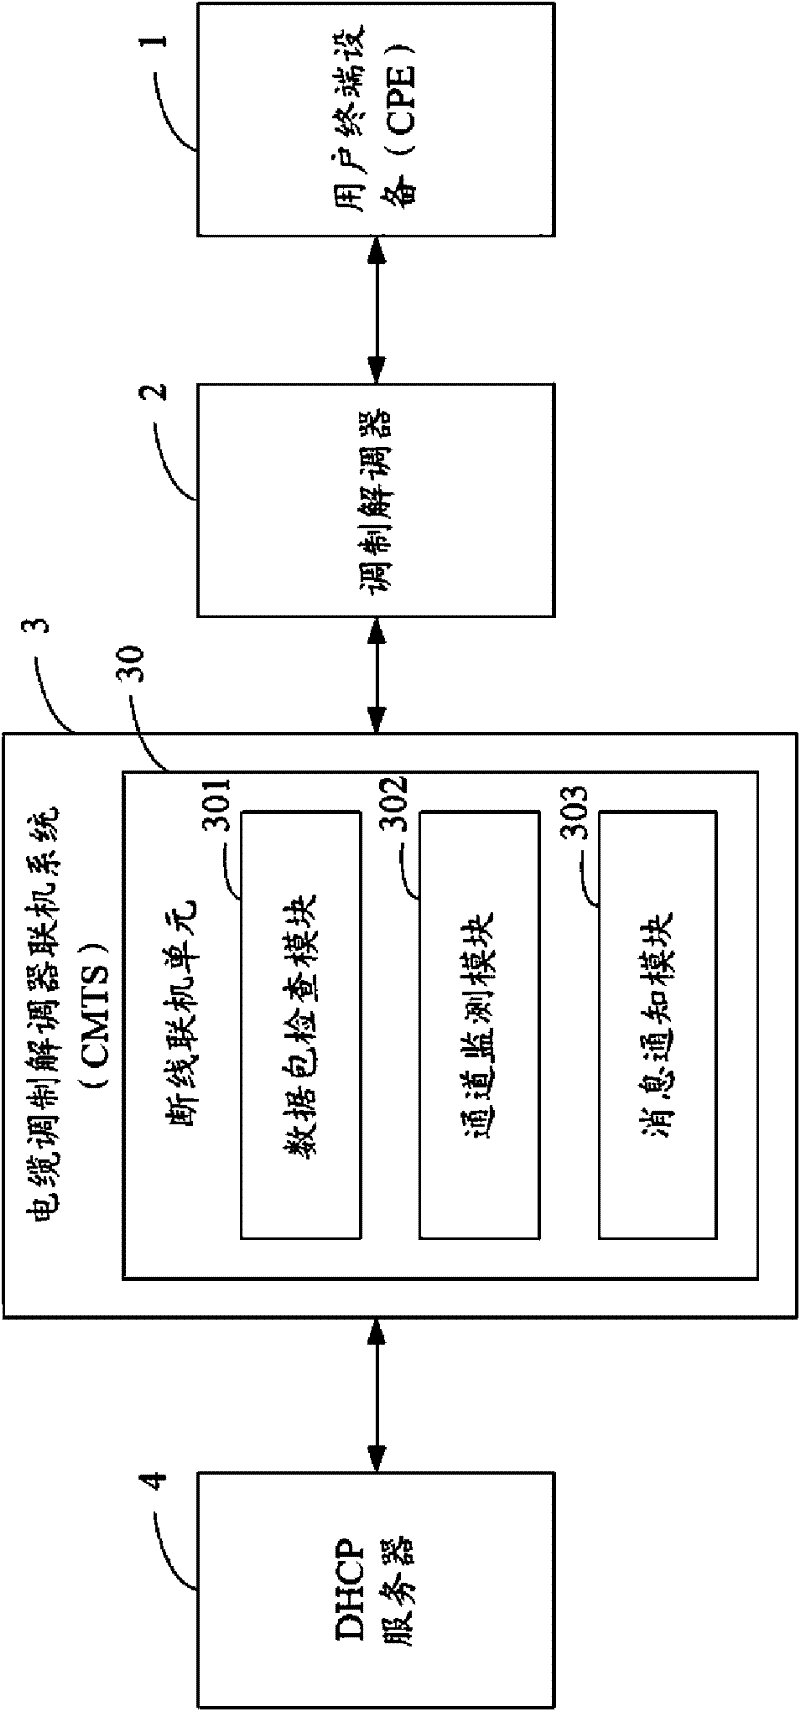 Cable modem termination system and method